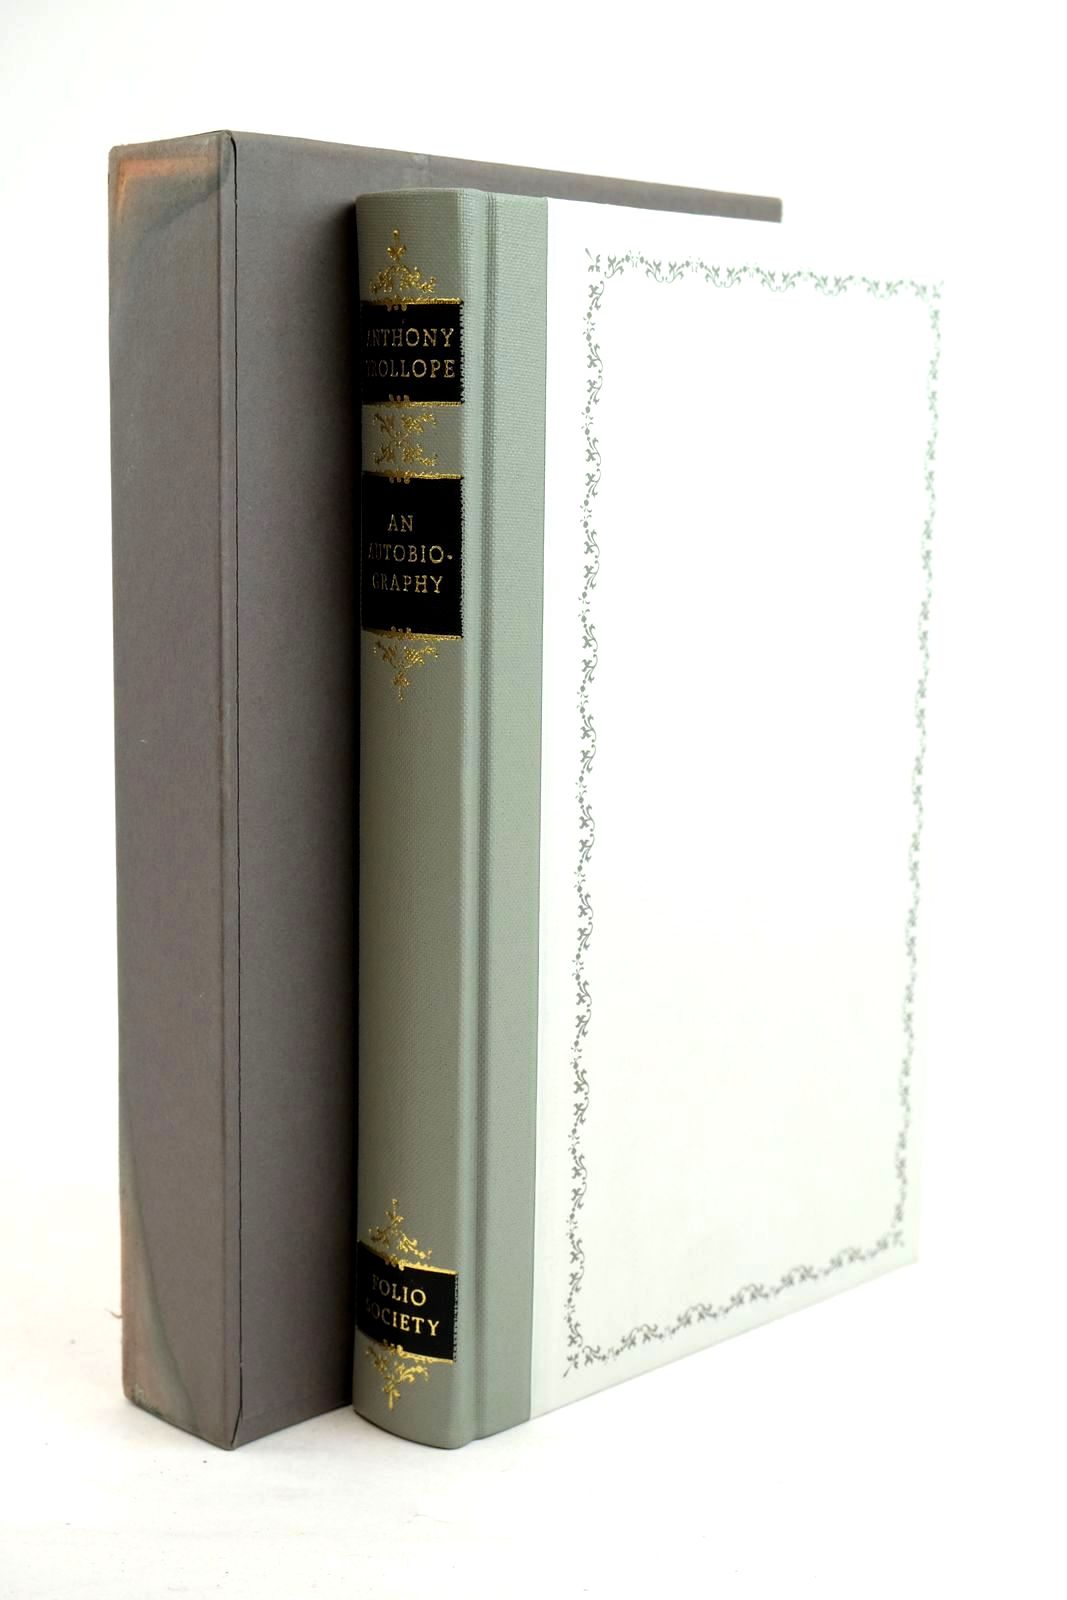 Photo of AN AUTOBIOGRAPHY written by Trollope, Anthony
Sutherland, John published by Folio Society (STOCK CODE: 1320470)  for sale by Stella & Rose's Books